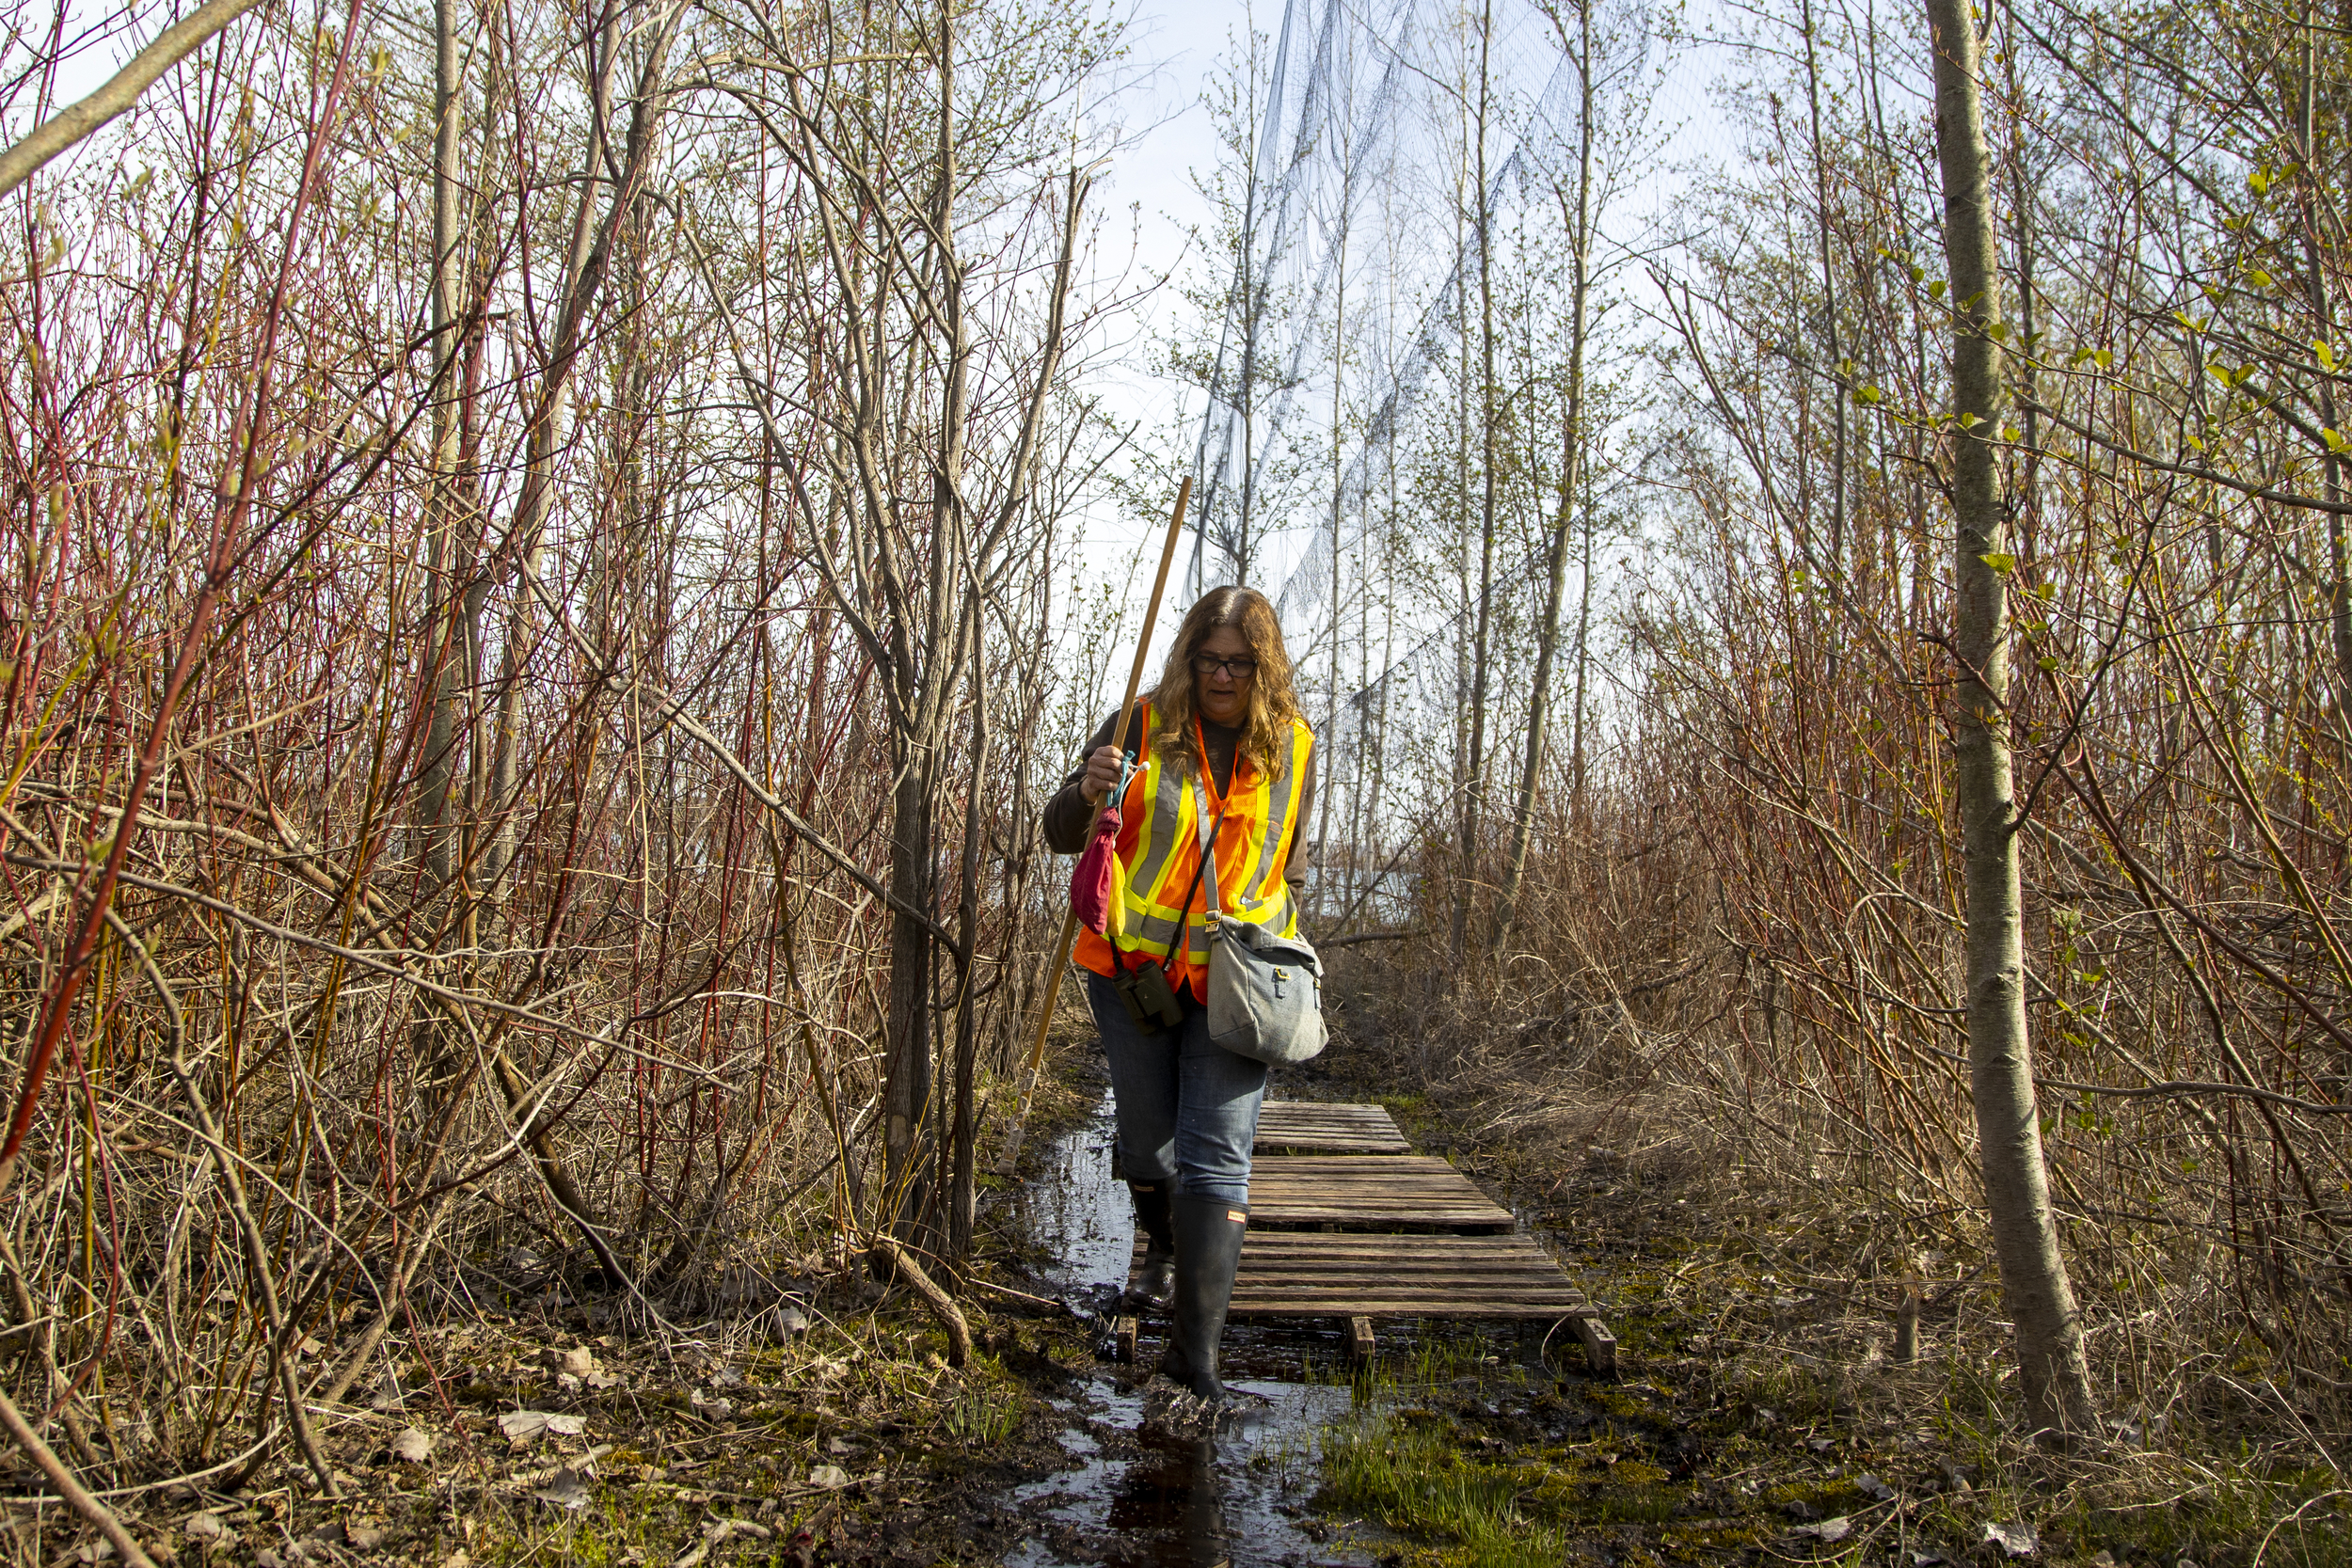 A woman in an orange vest and rain boots walks through a puddle in the woods beside a long, barely-visible net